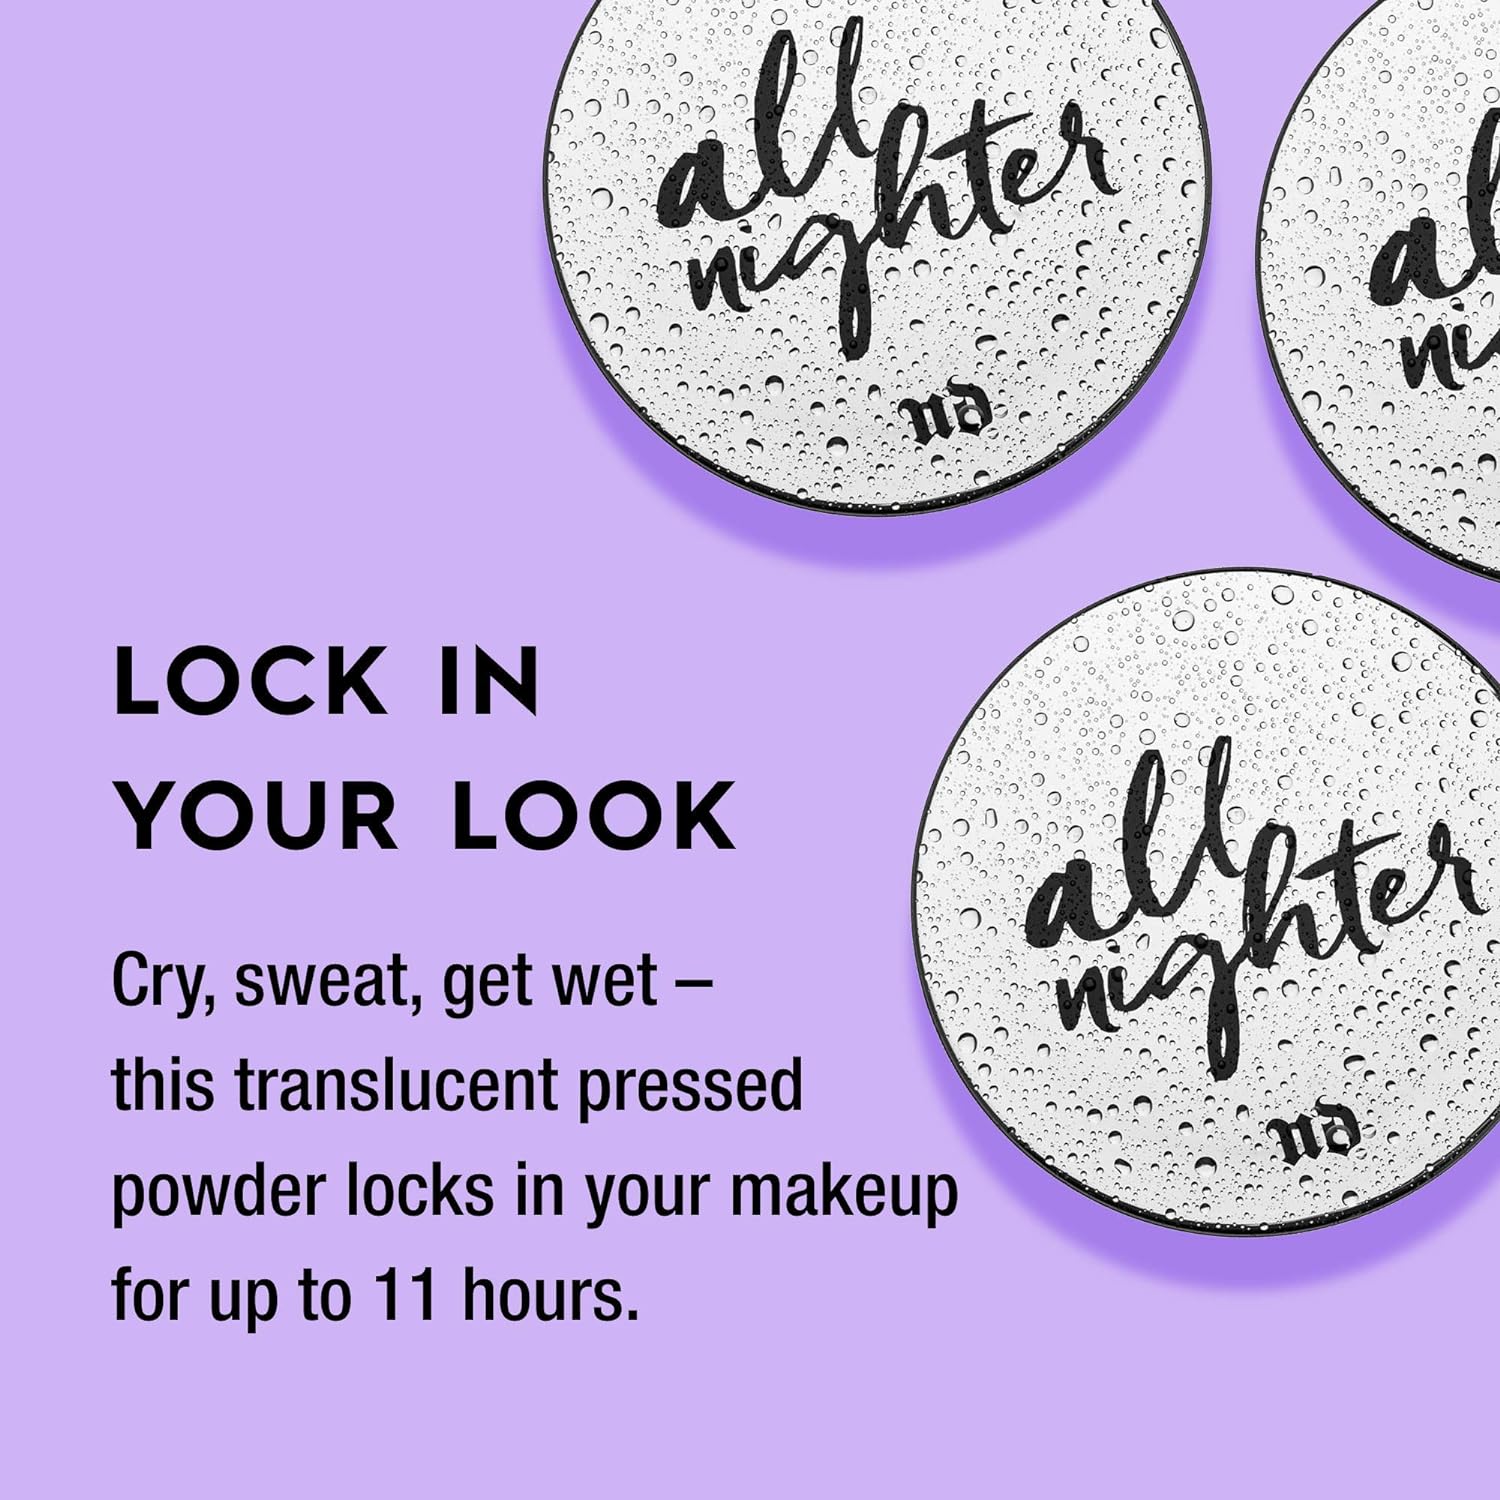  Urban Decay All Nighter Waterproof Setting Powder - Lightweight, Translucent Makeup Finishing Powder - Smooths Skin & Minimizes Shine - Lasts Up To 11 Hours